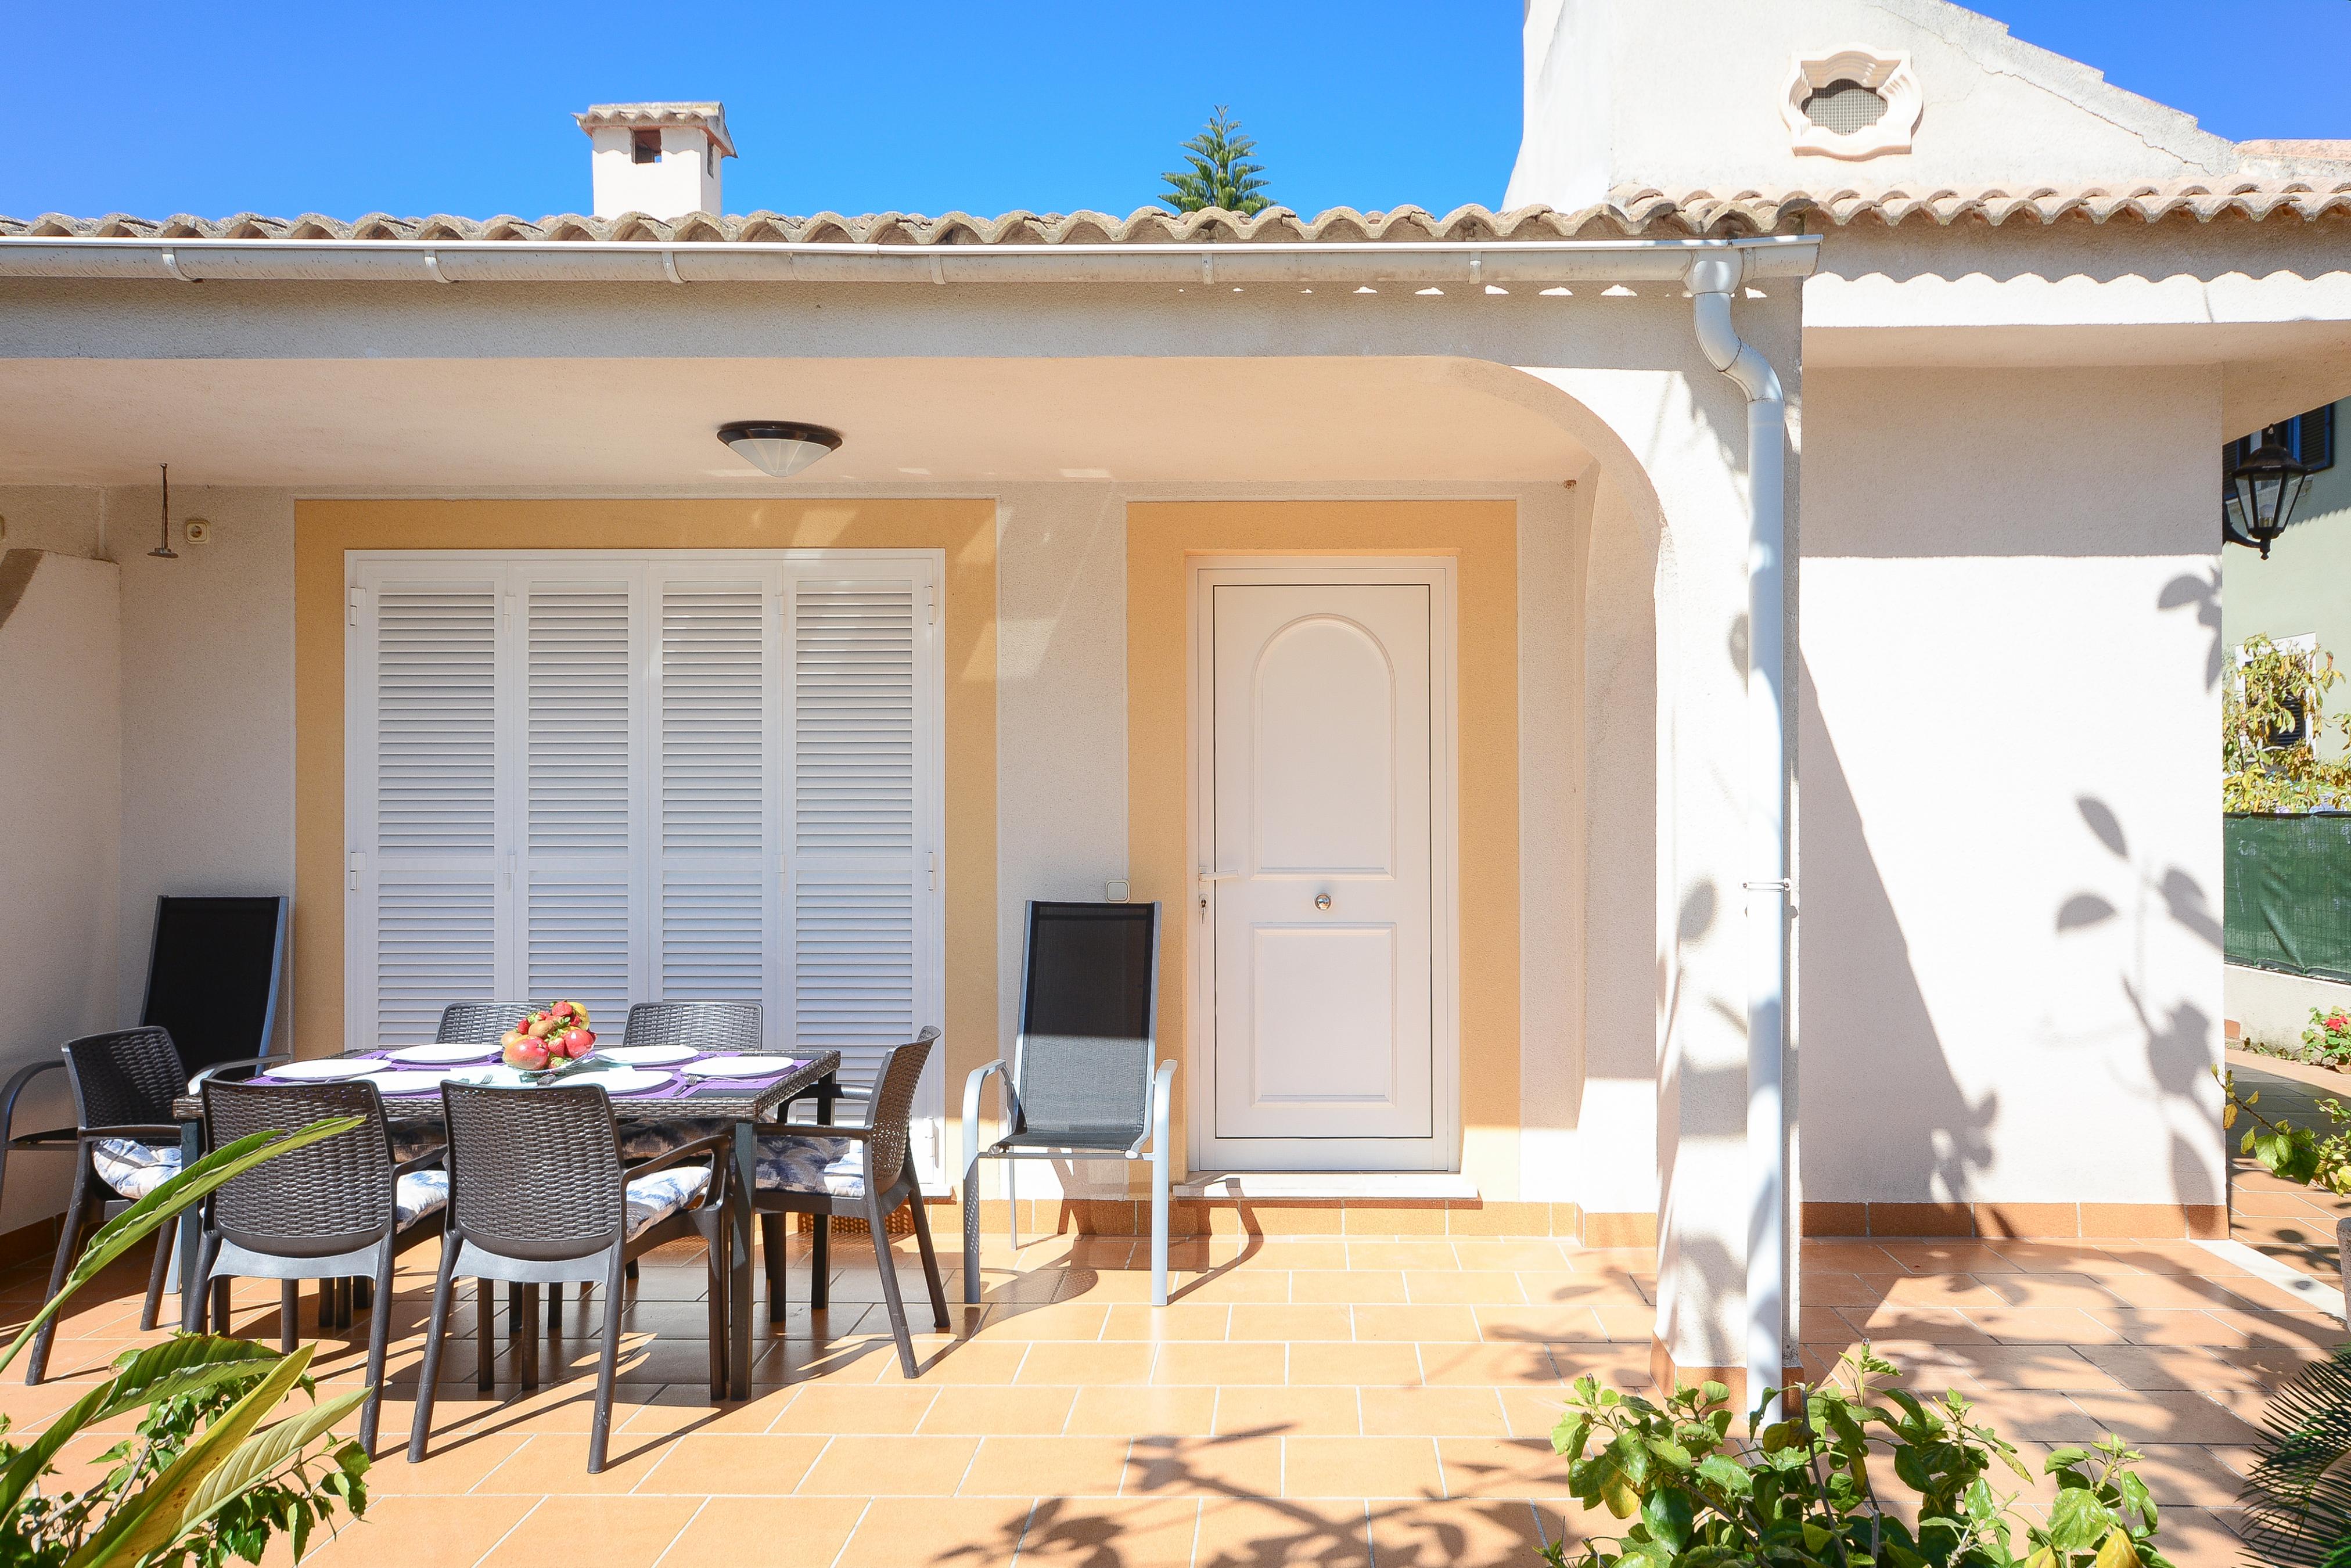 Property Image 1 - PINYA - Chalet with private garden in PORT D’ALCUDIA. Free WiFi